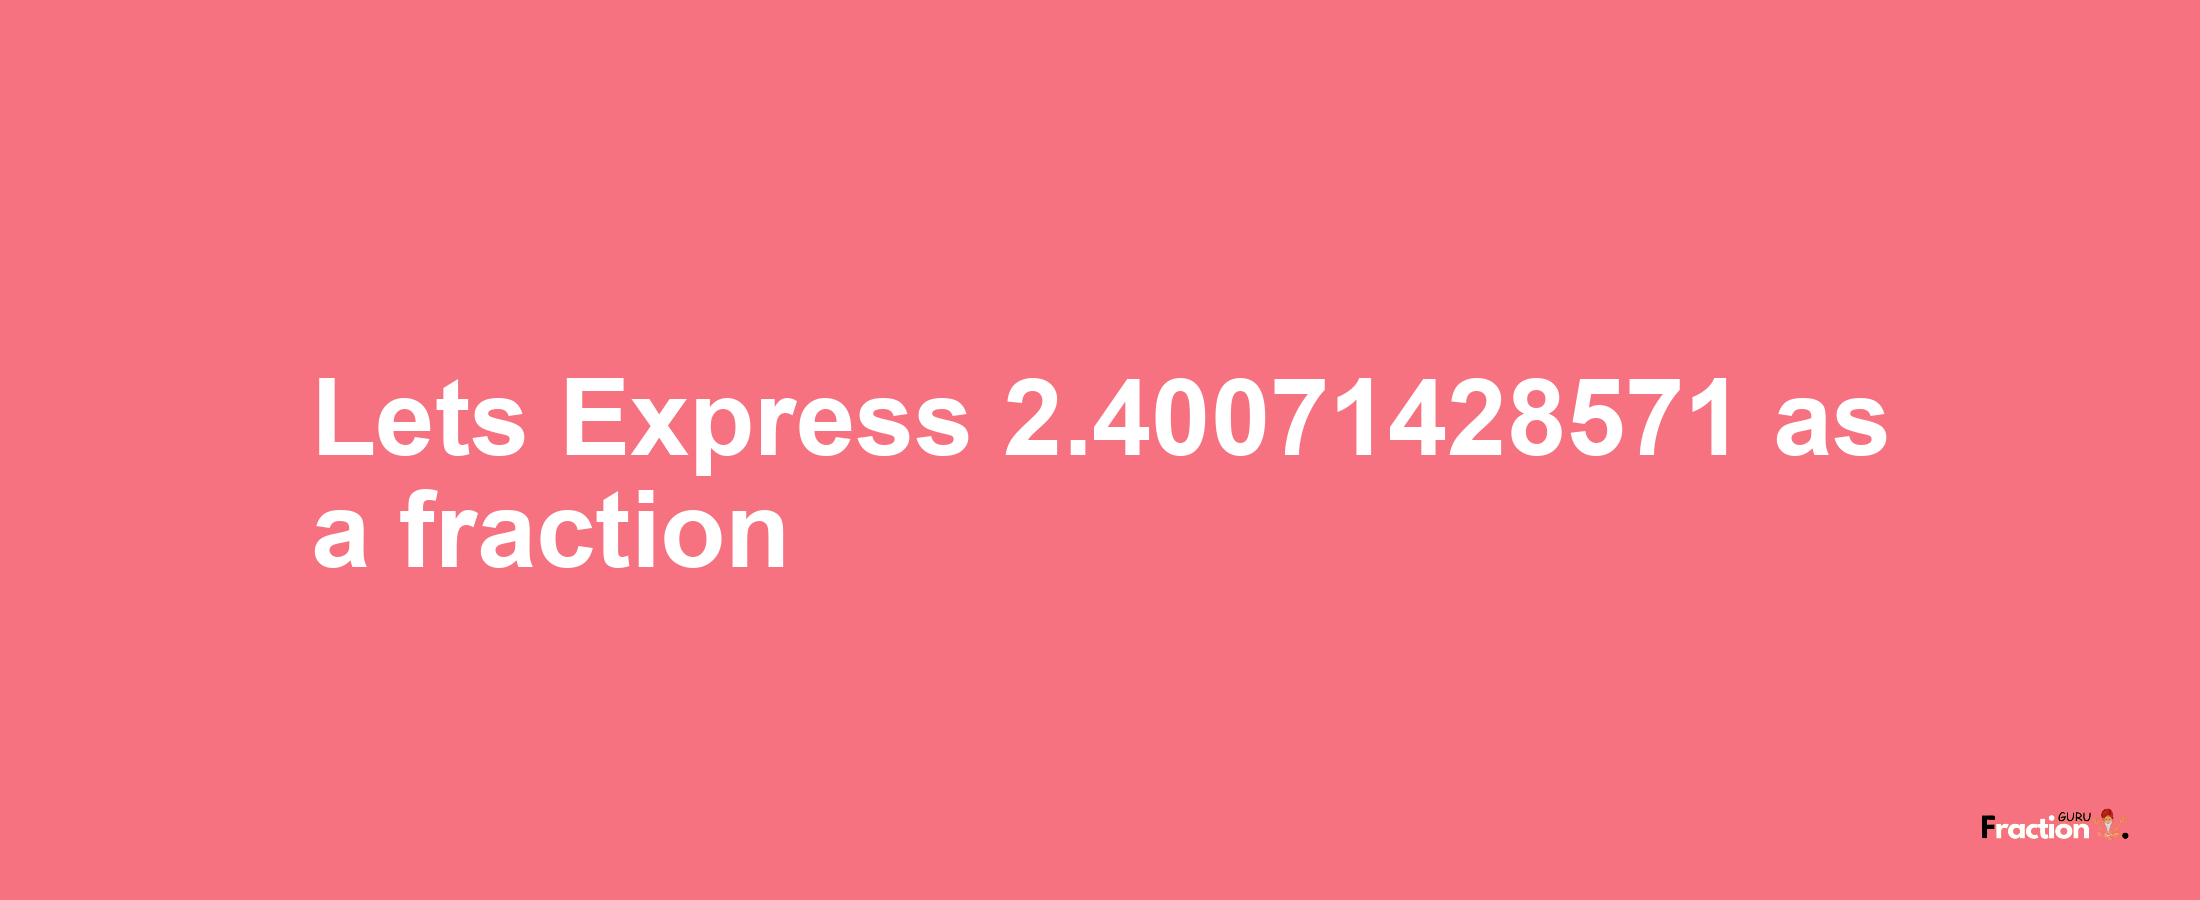 Lets Express 2.40071428571 as afraction